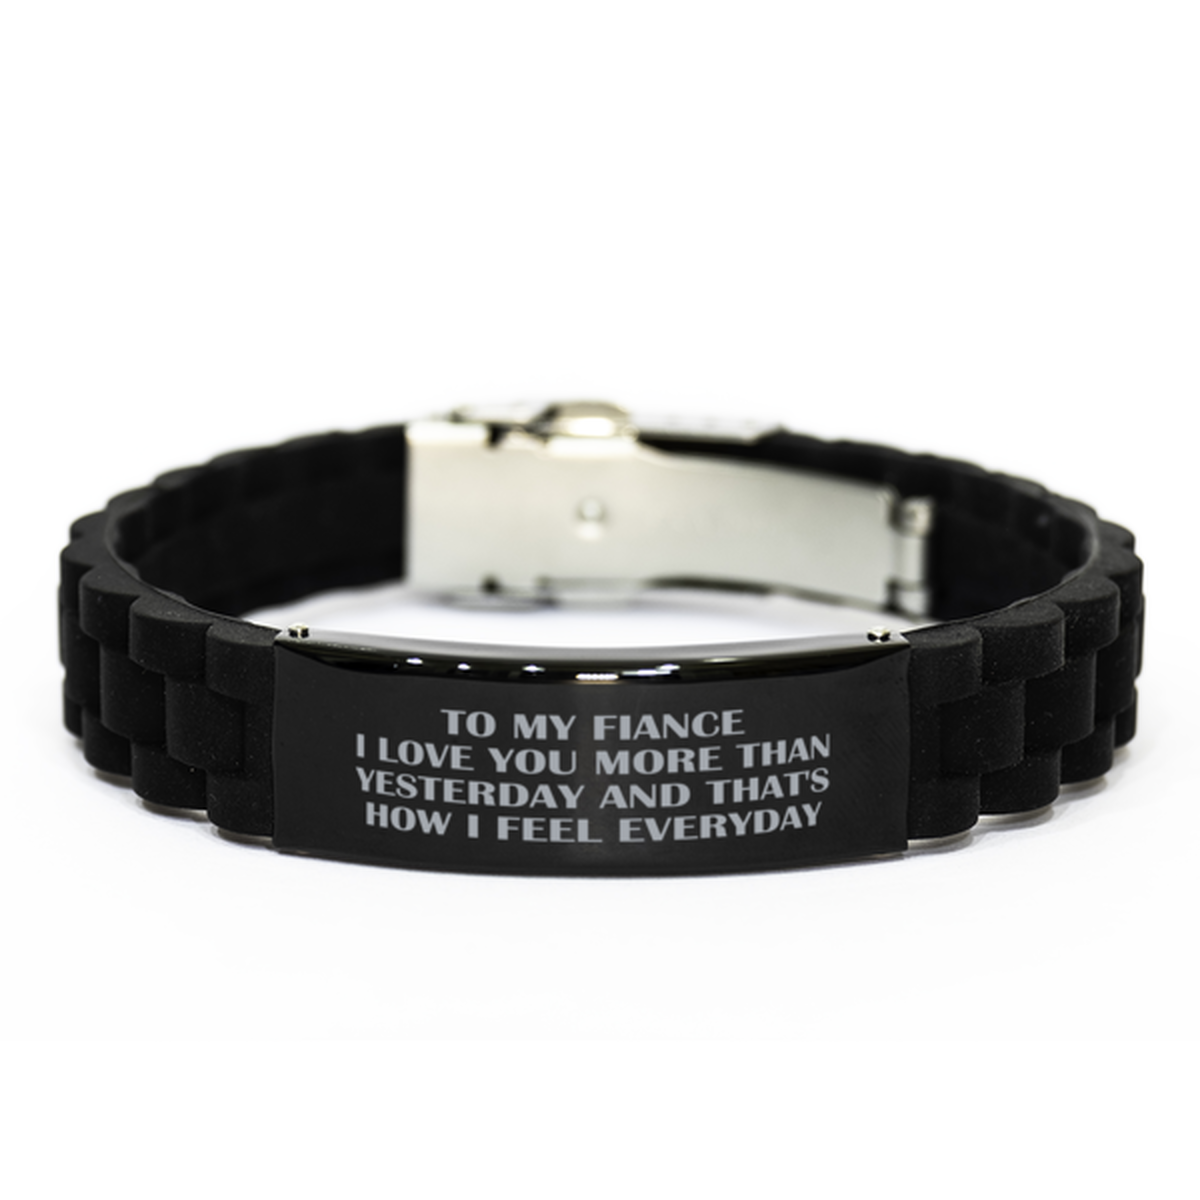 To My Fiance Black Bracelet, I Love You More Than Yesterday, Valentines  Gifts For Fiance From Fiancee, Birthday Gifts For Men